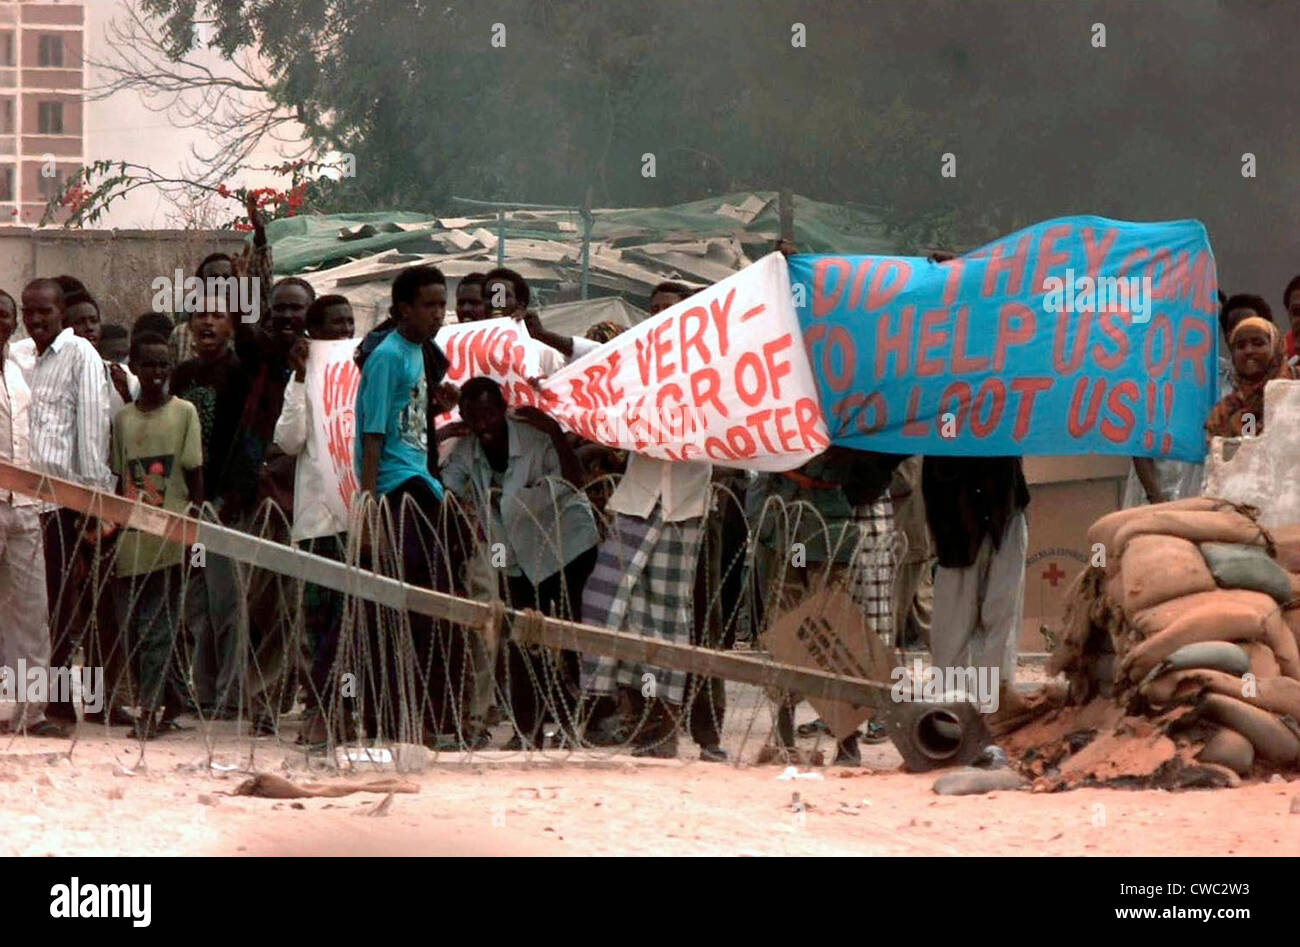 Somali civilians protest the presence of U.N. mostly U.S. forces in Mogadishu at the U.S. Embassy in Somalia. Their banner Stock Photo